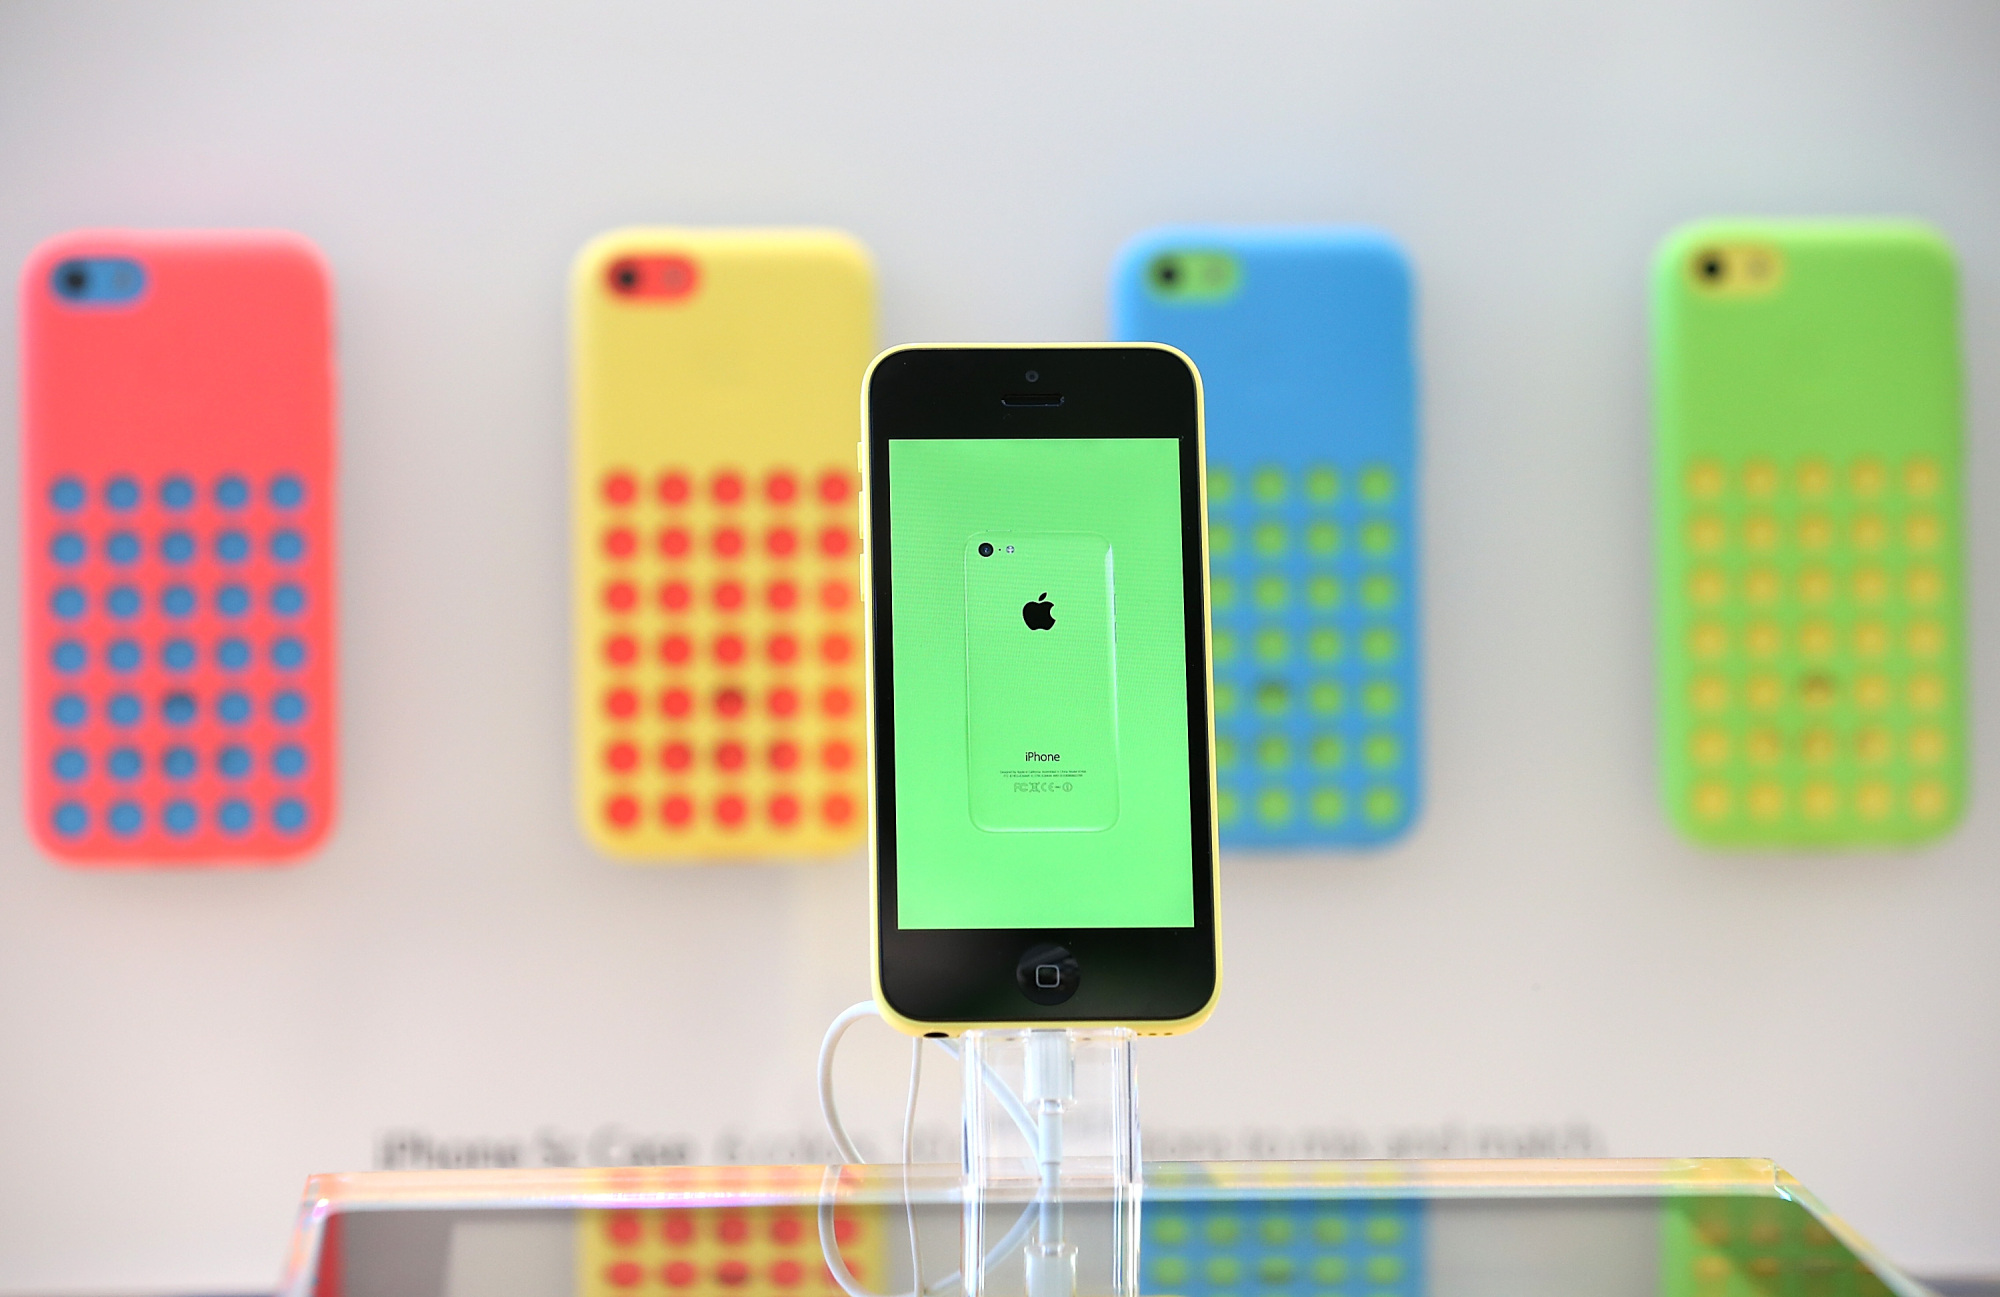 Image of iPhone 5c on sale in Palo Alto, California